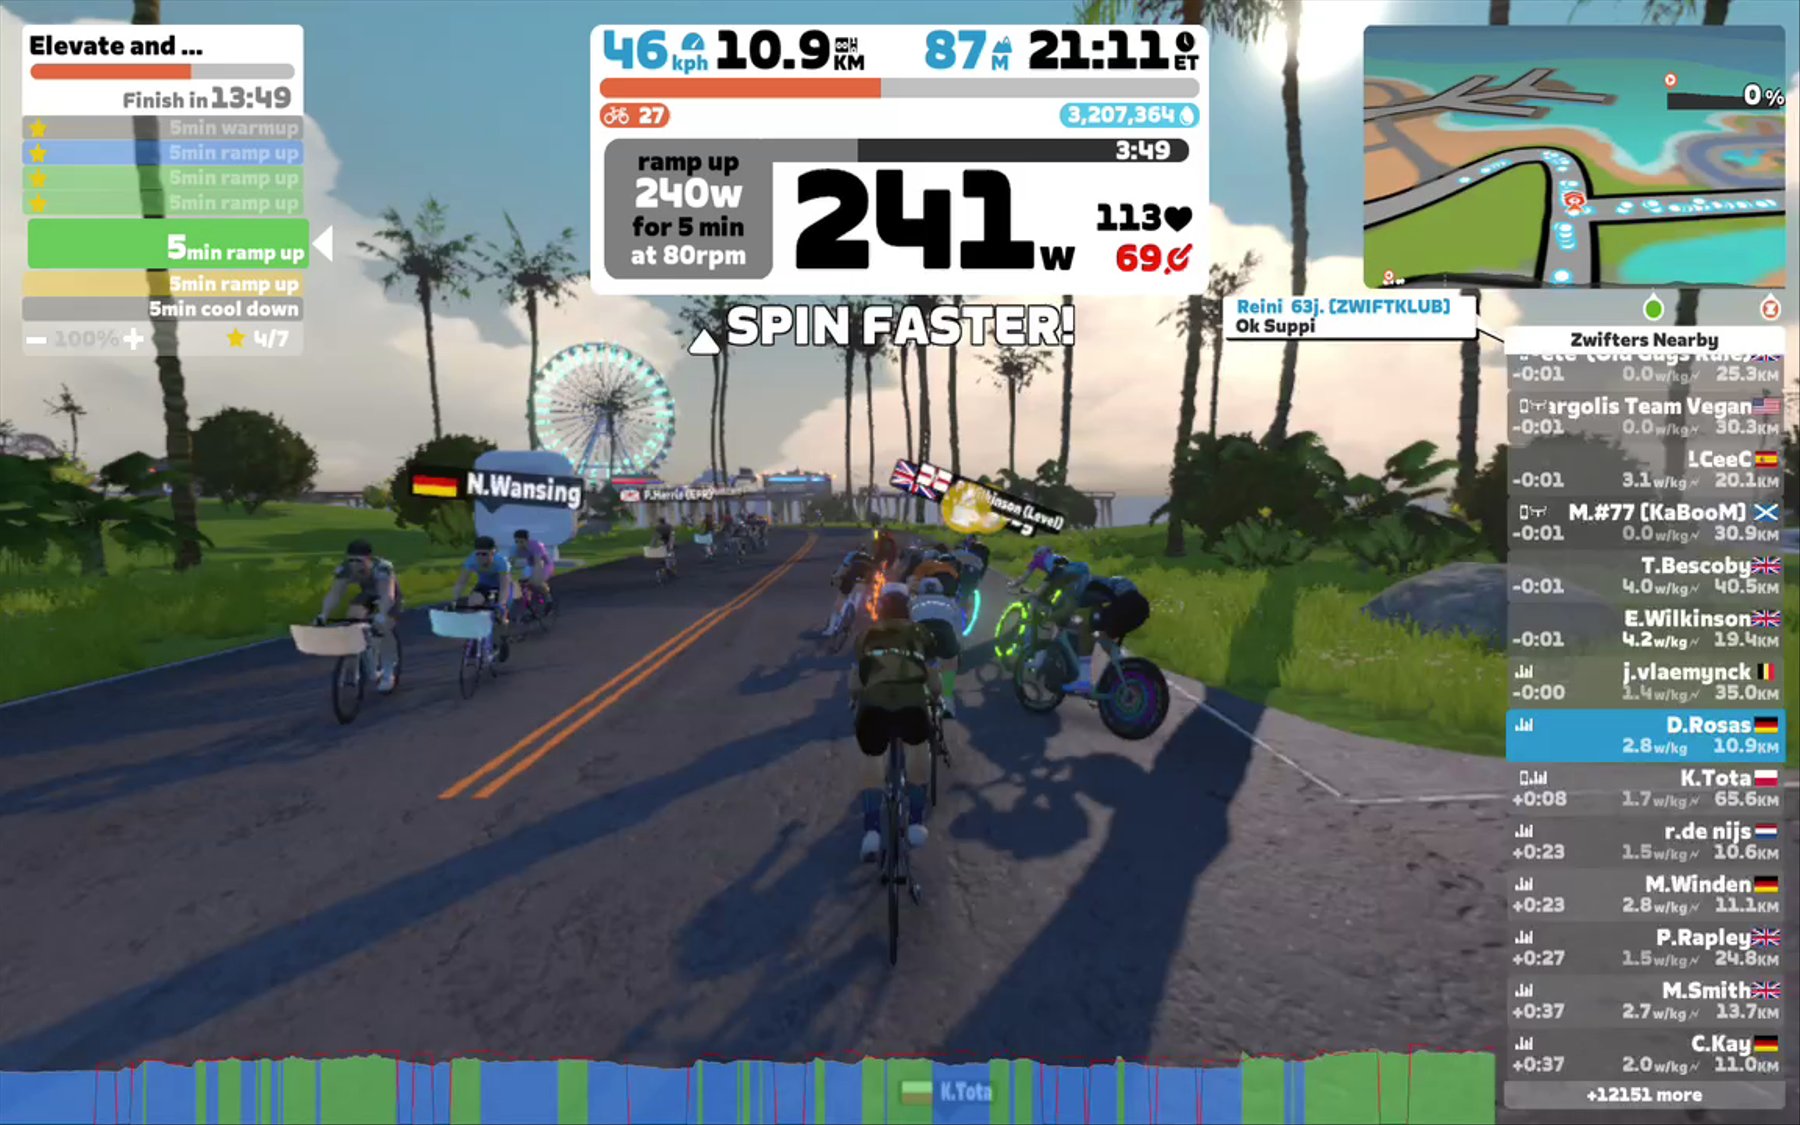 Zwift - Elevate and Escalate in Watopia